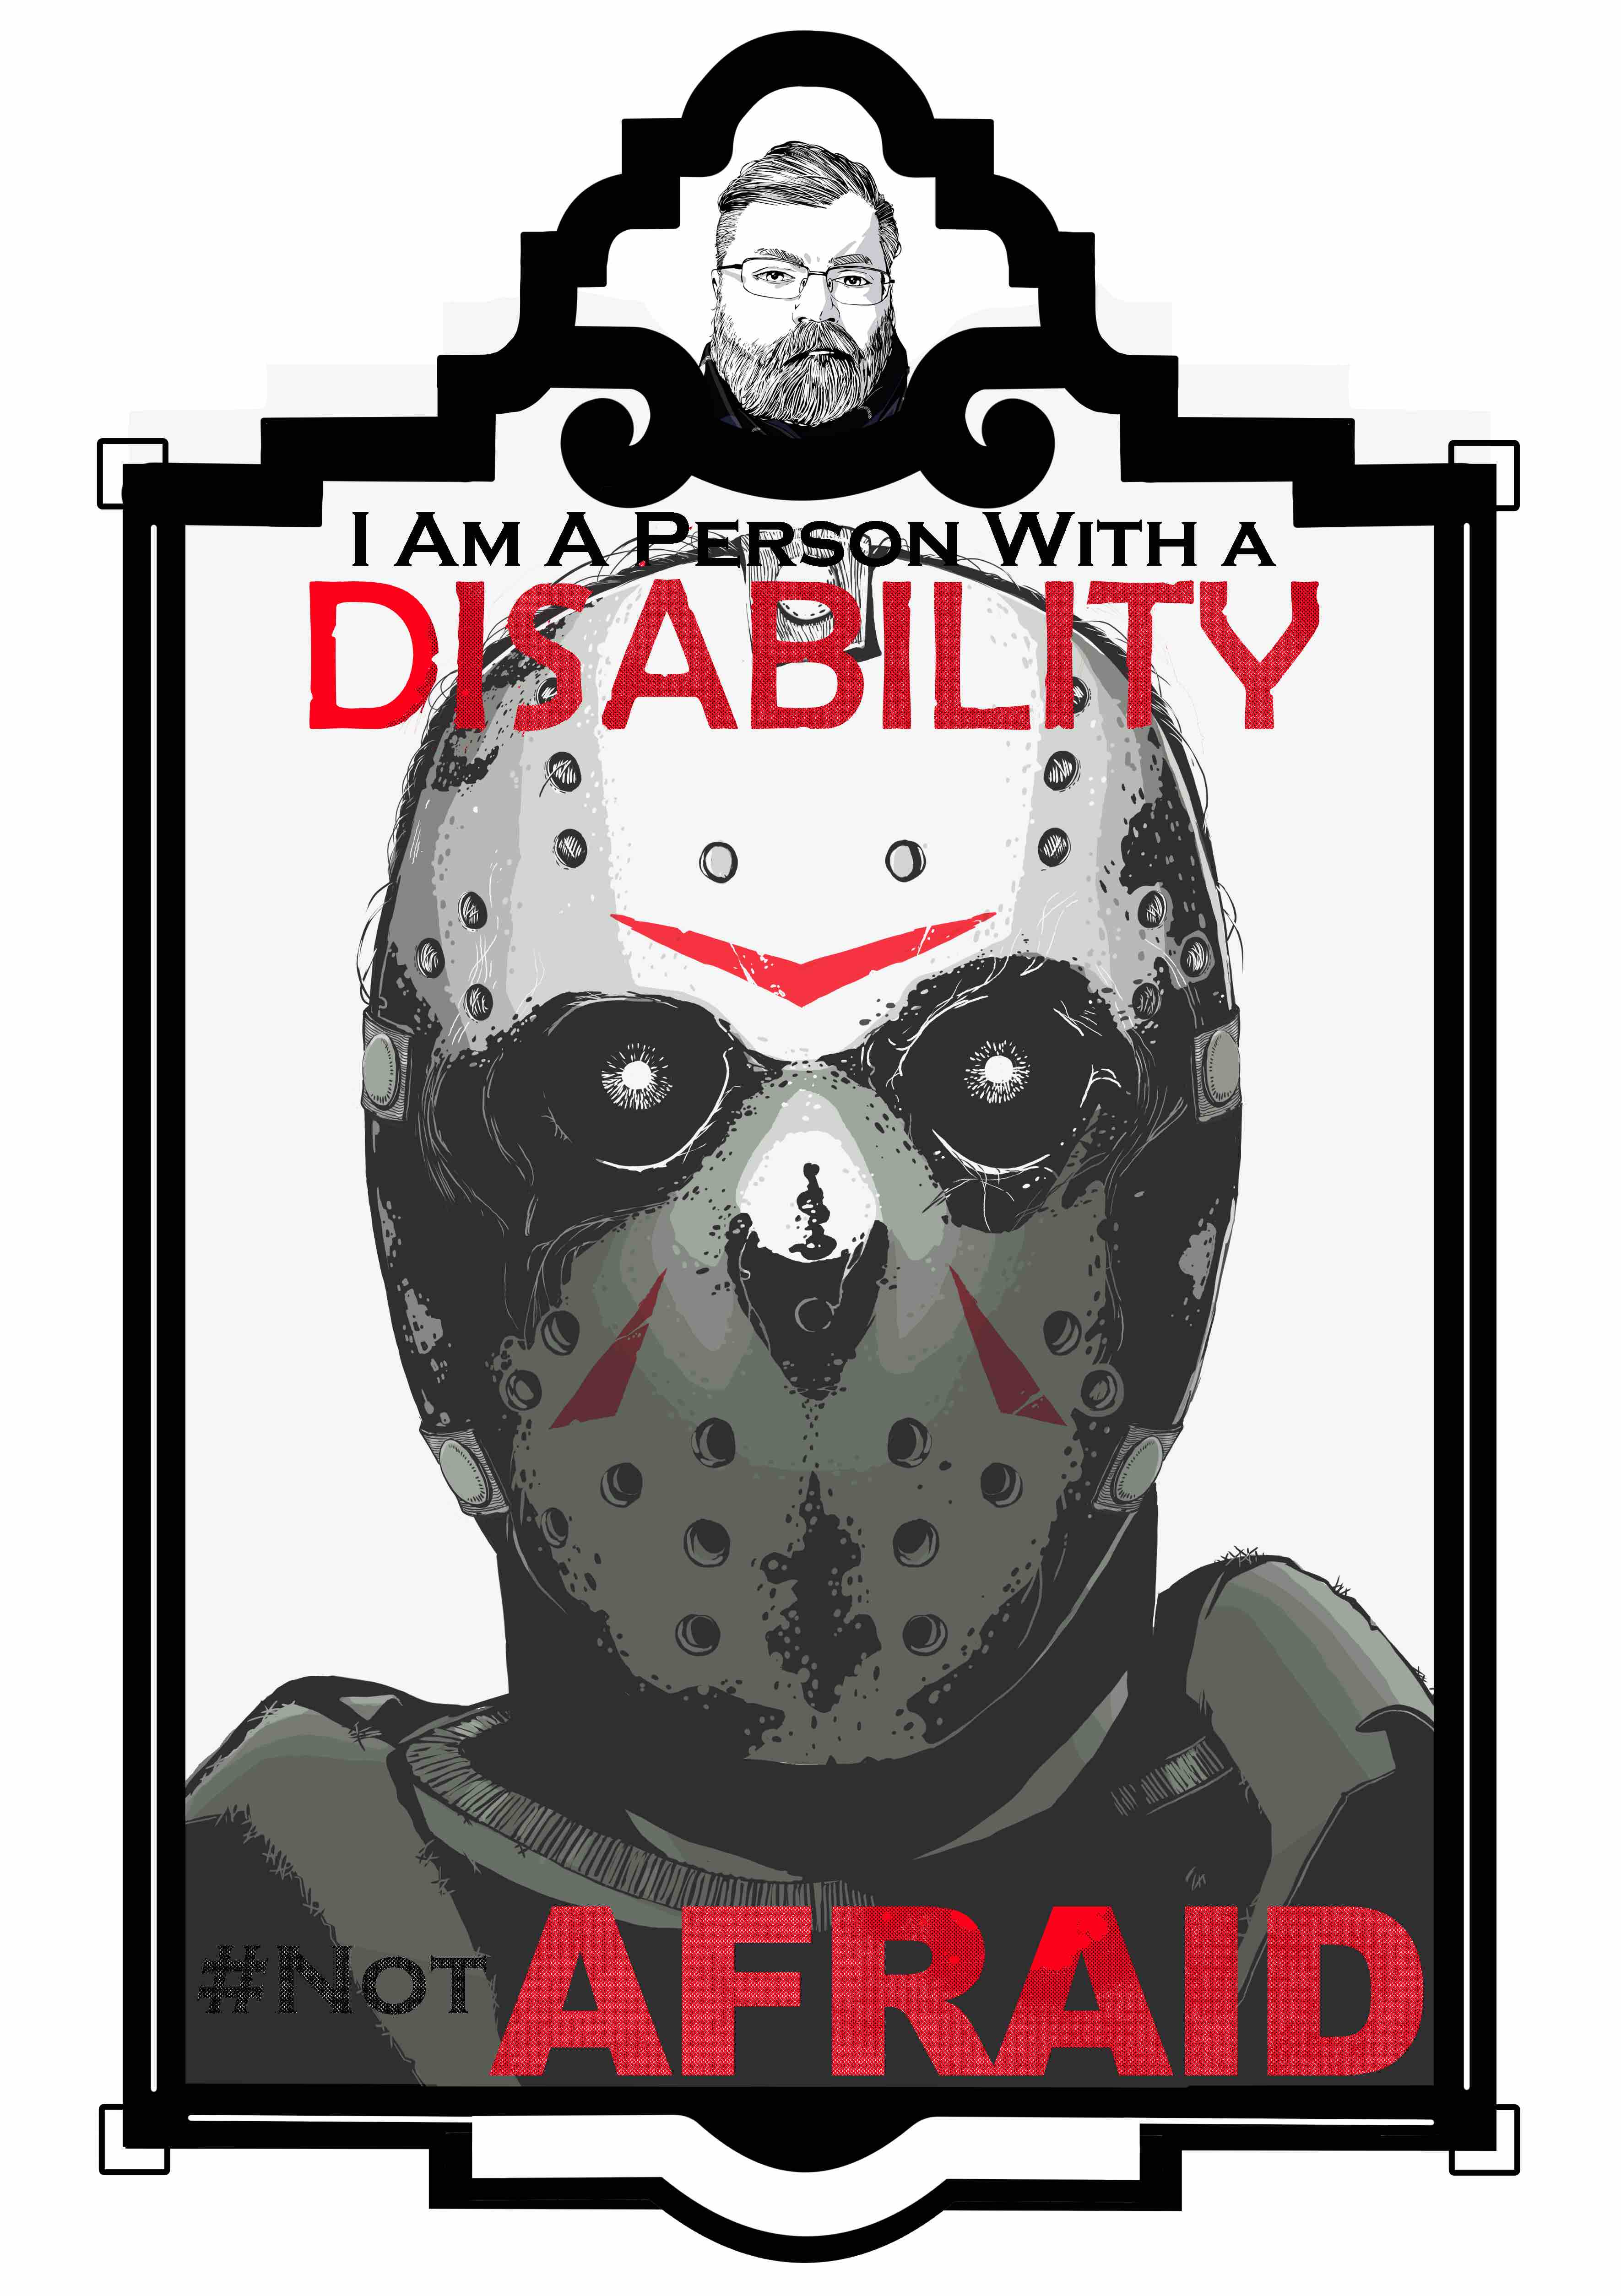 An illustration of Jason Voorhees in his hockey mask from the horror movie Friday the 13th in an art deco frame. The frame consists of a small marquee at the top with an image of the artist and the main image below. The text “I am a person with a disability.’ Sits at the top of the illustration. The word “Disability” is in all caps and is colored red. The text “# Not AFRAID” is at the bottom of the illustration. Jason is wearing a frayed green jacket and t-shirt. His mask is mottled with 3 red markings one on the forehead and the other two on either side of the nose. The mask has ventilation holes at the top and bottom and his eyes are white lines inside a black socket.